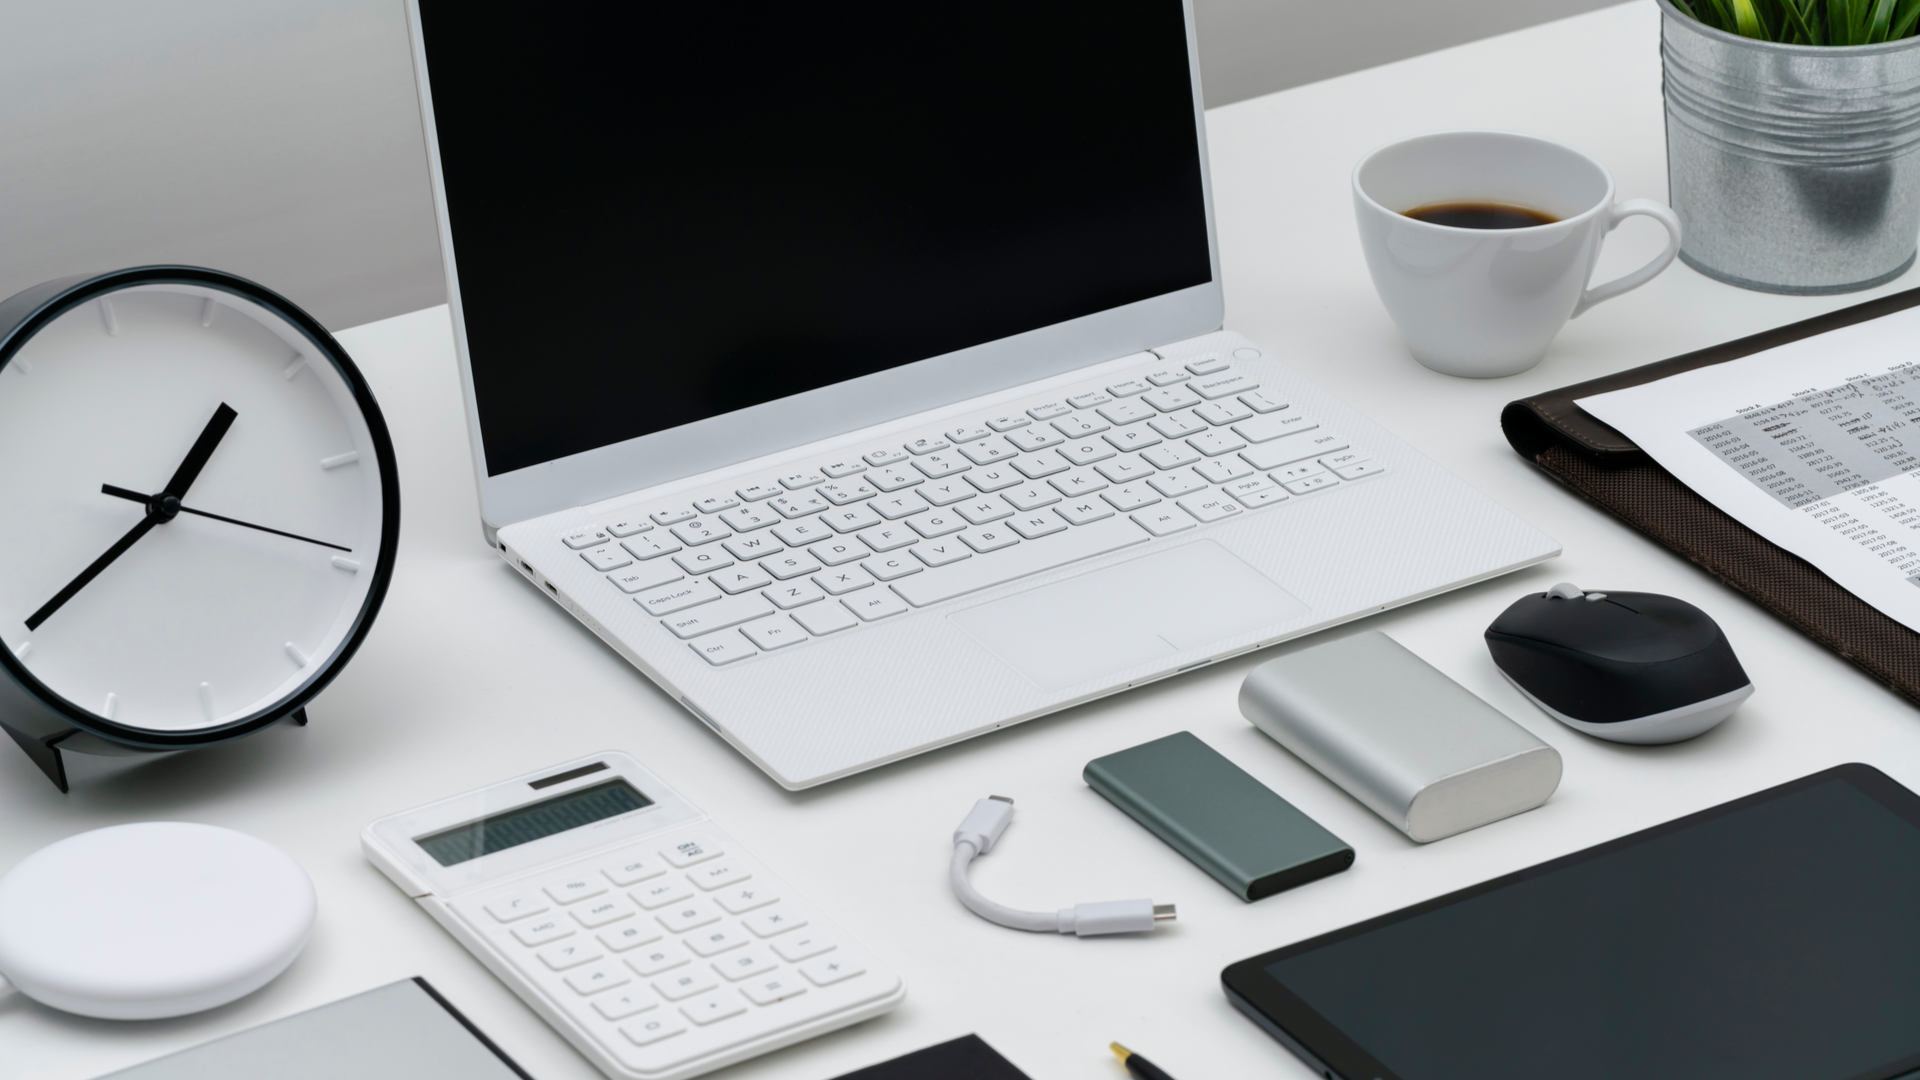 Top 10 Must-Have Productivity Gadgets for Professionals